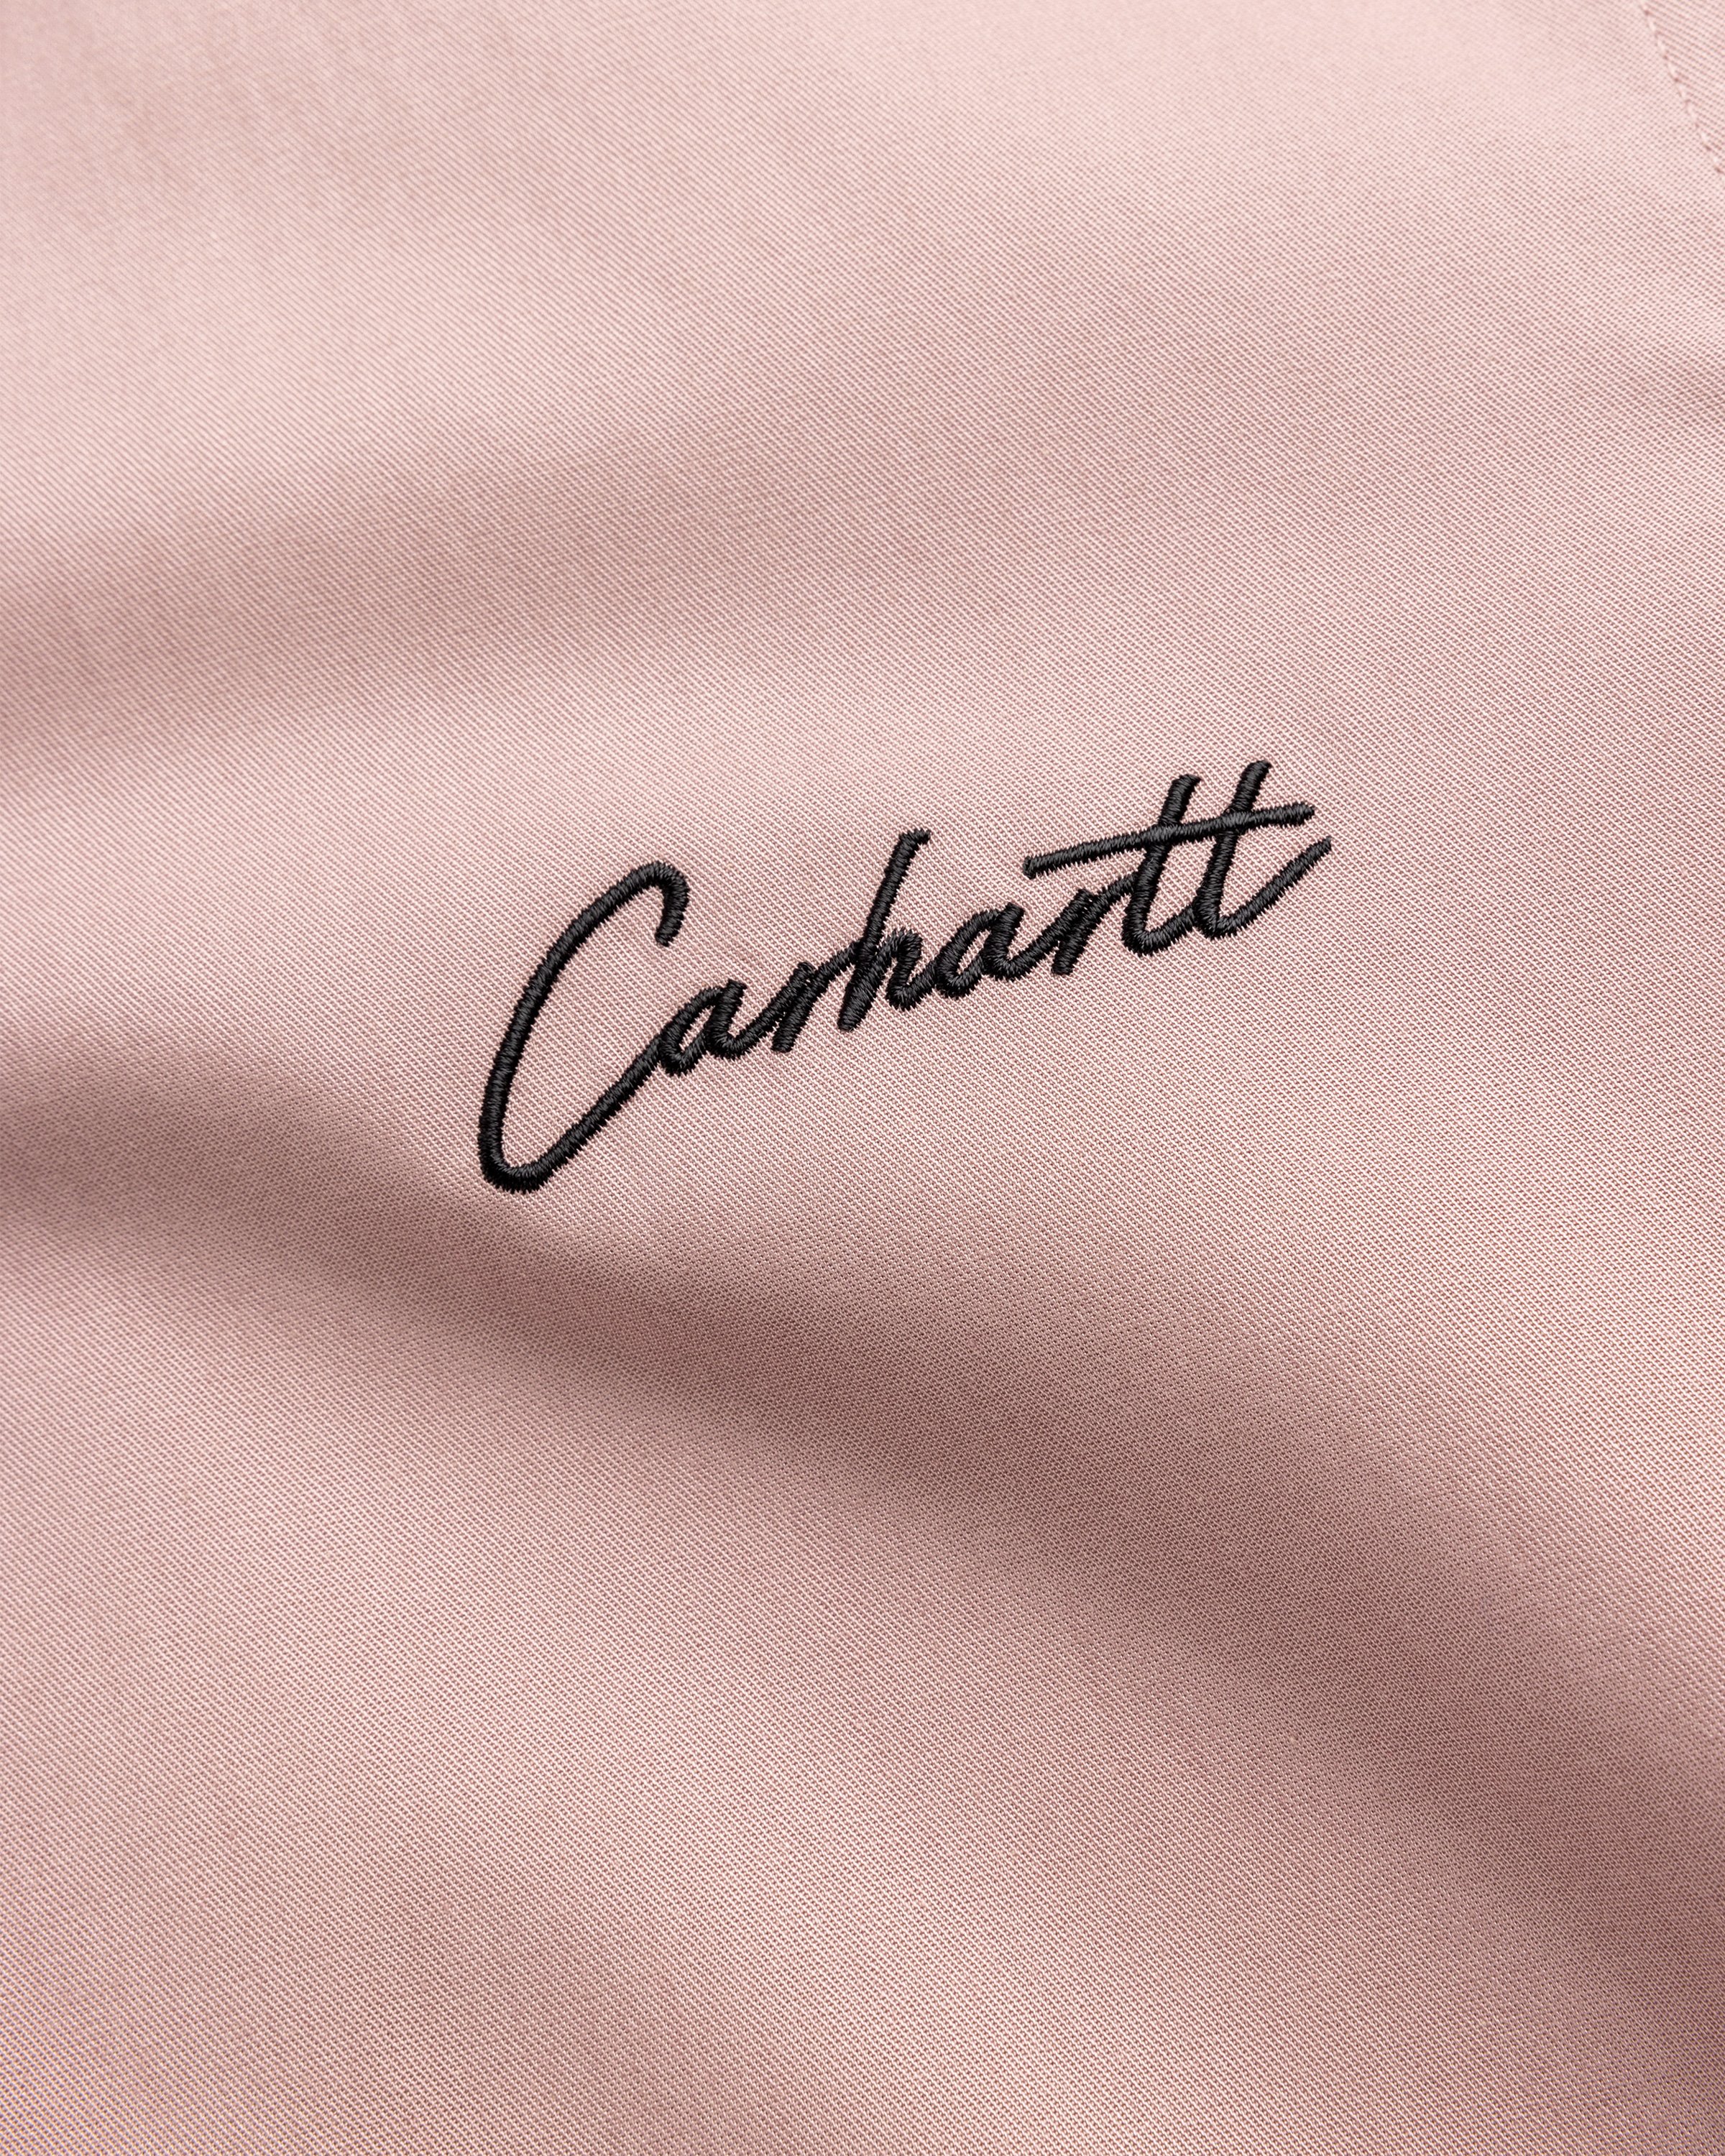 Carhartt WIP - S/S Delray Shirt Glassy Pink / Black - Clothing - Pink - Image 6